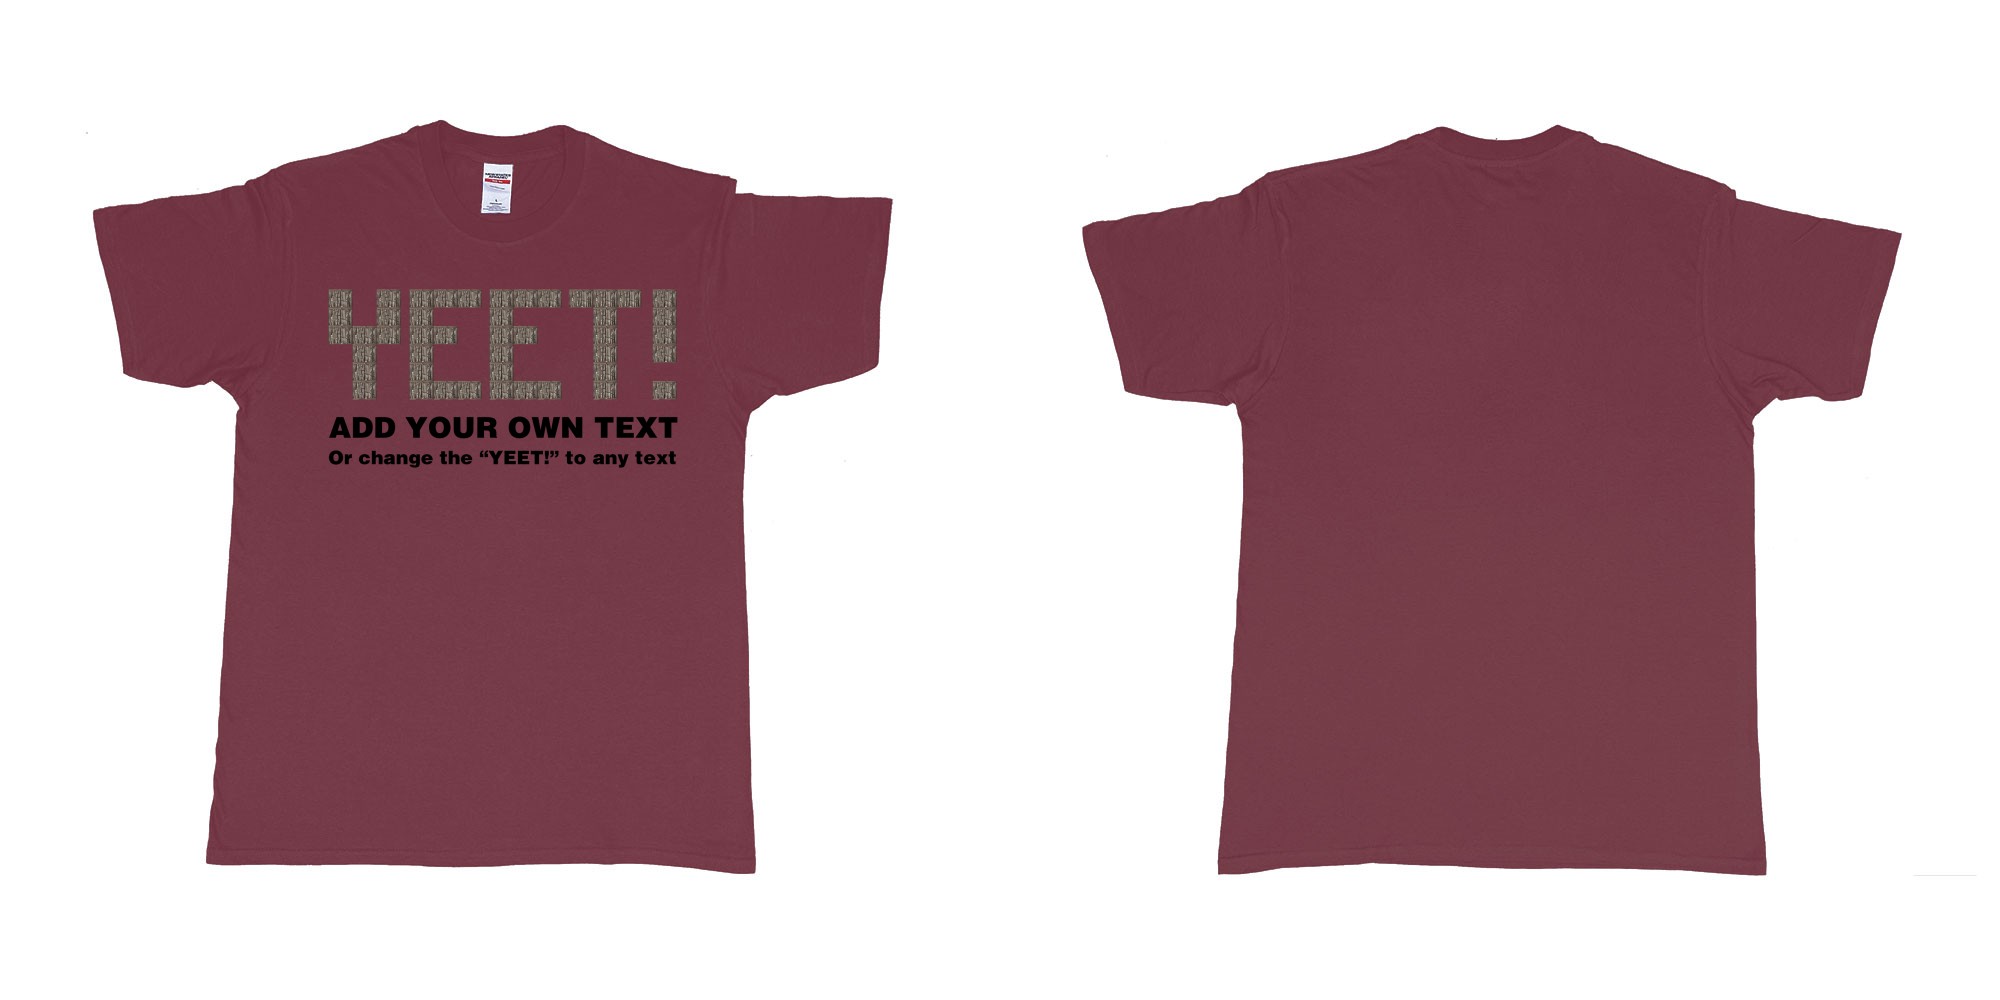 Custom tshirt design fortnite wood wall custom text yeet design in fabric color marron choice your own text made in Bali by The Pirate Way